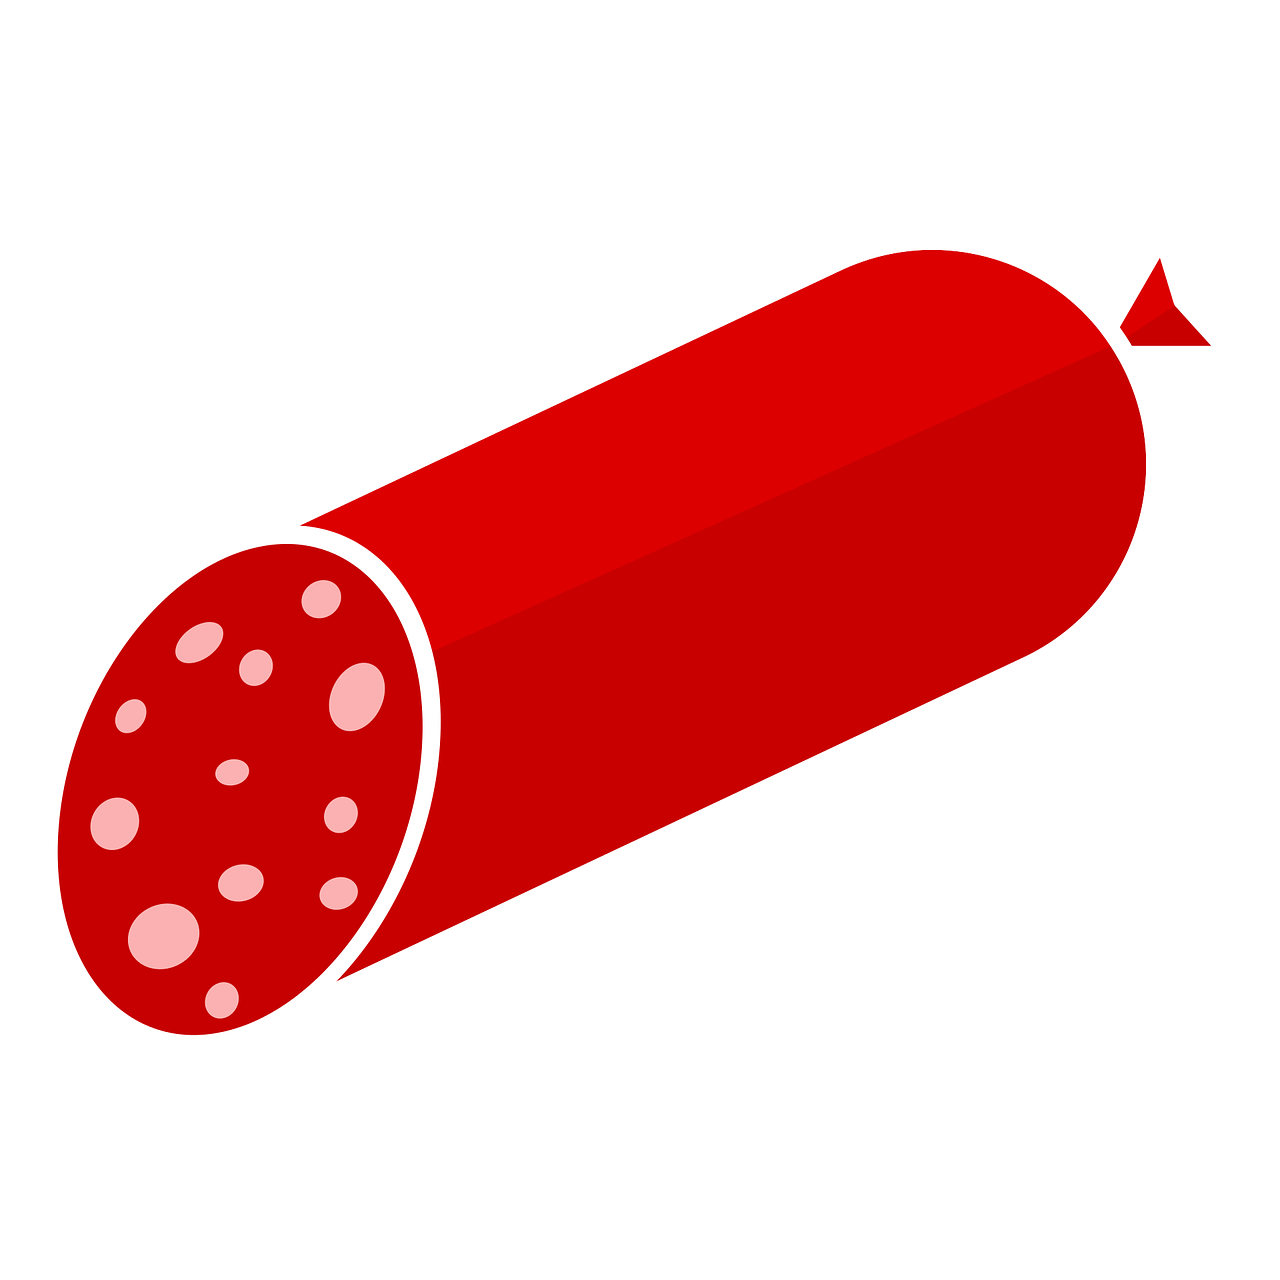 a sticker of a sausage on a black background, an illustration of, mingei, [[blood]], lineless, food particles, [ conceptual art ]!!